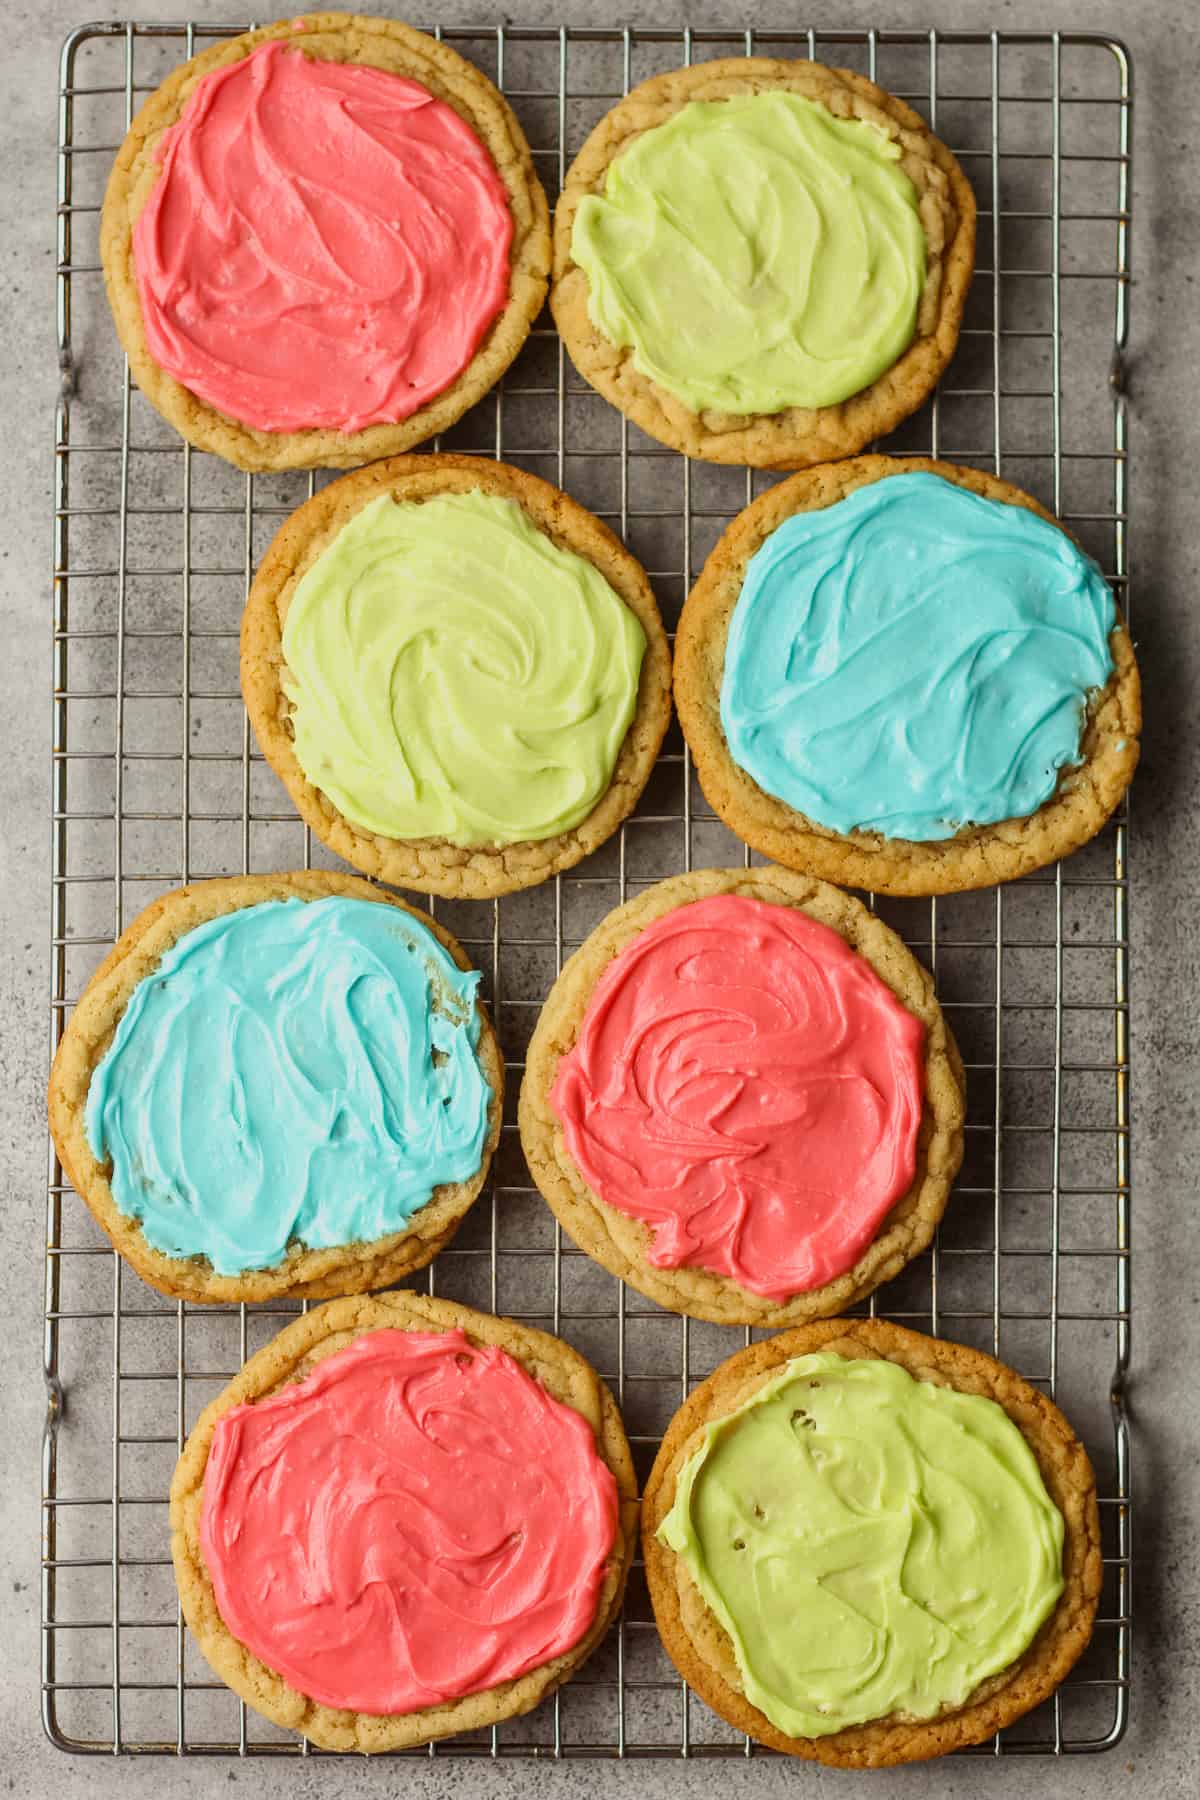 Overhead view of 8 sugar cookies with icing.